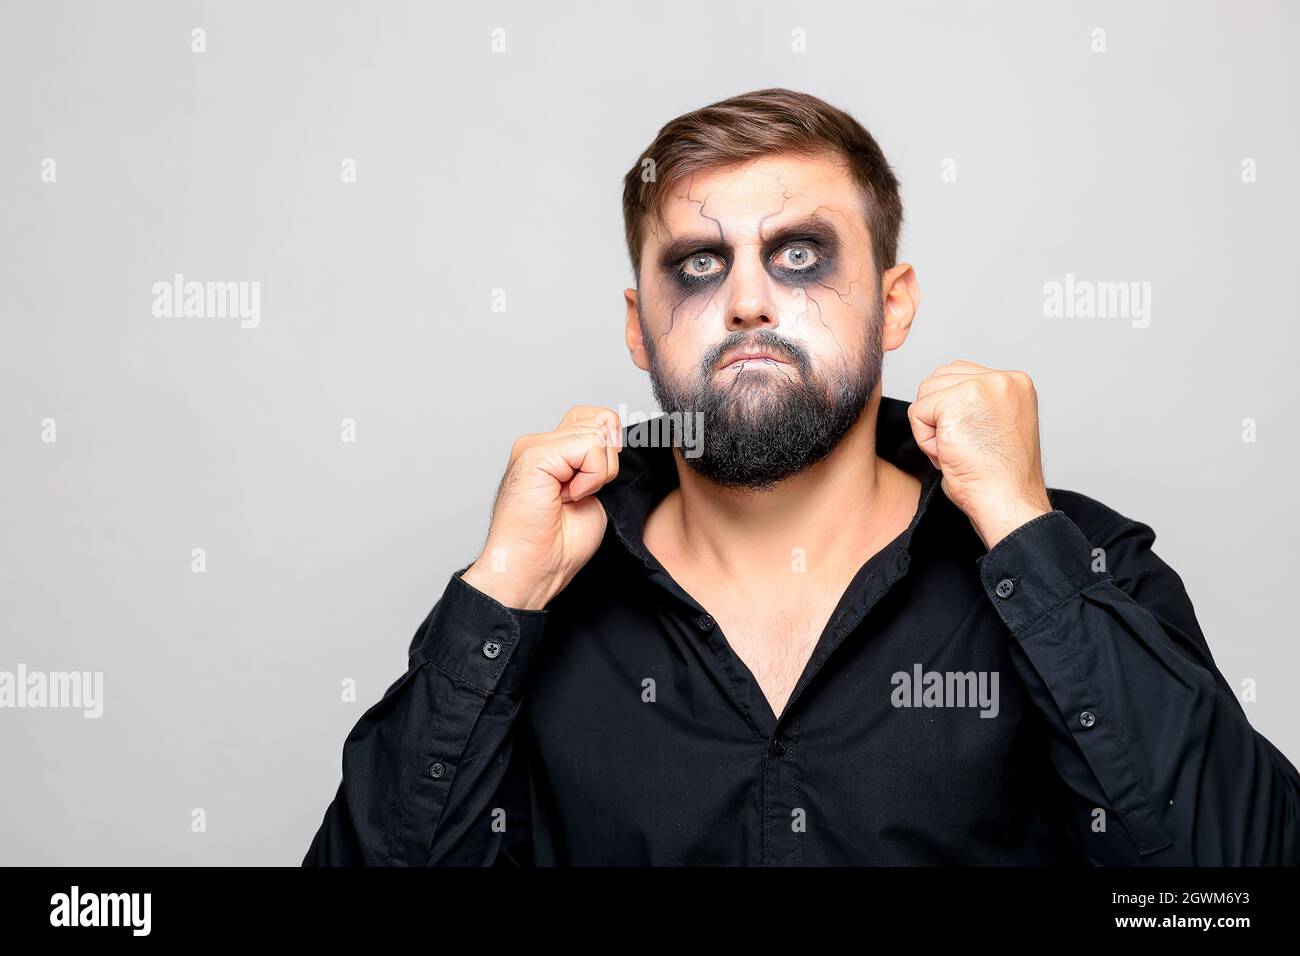 a man in a black shirt stands on a white background who has undead-style makeup for Halloween Stock Photo